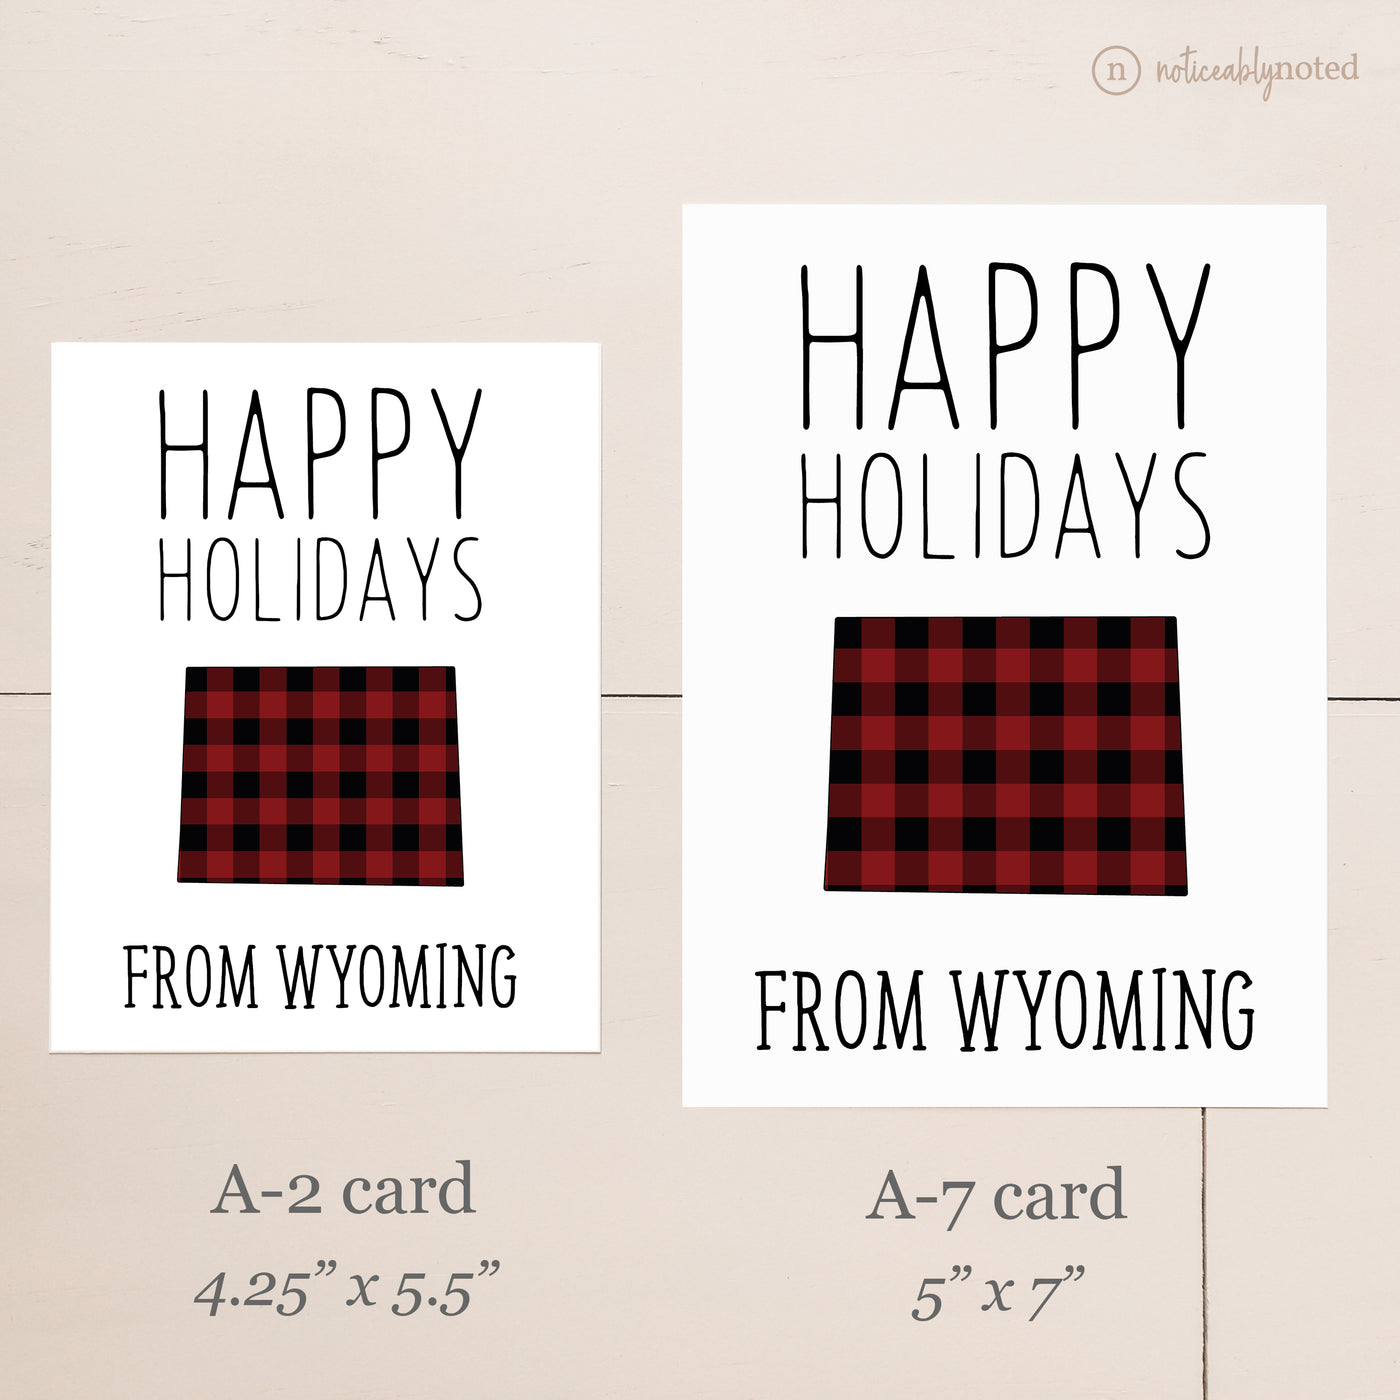 Holiday Card Comparison | Noticeably Noted